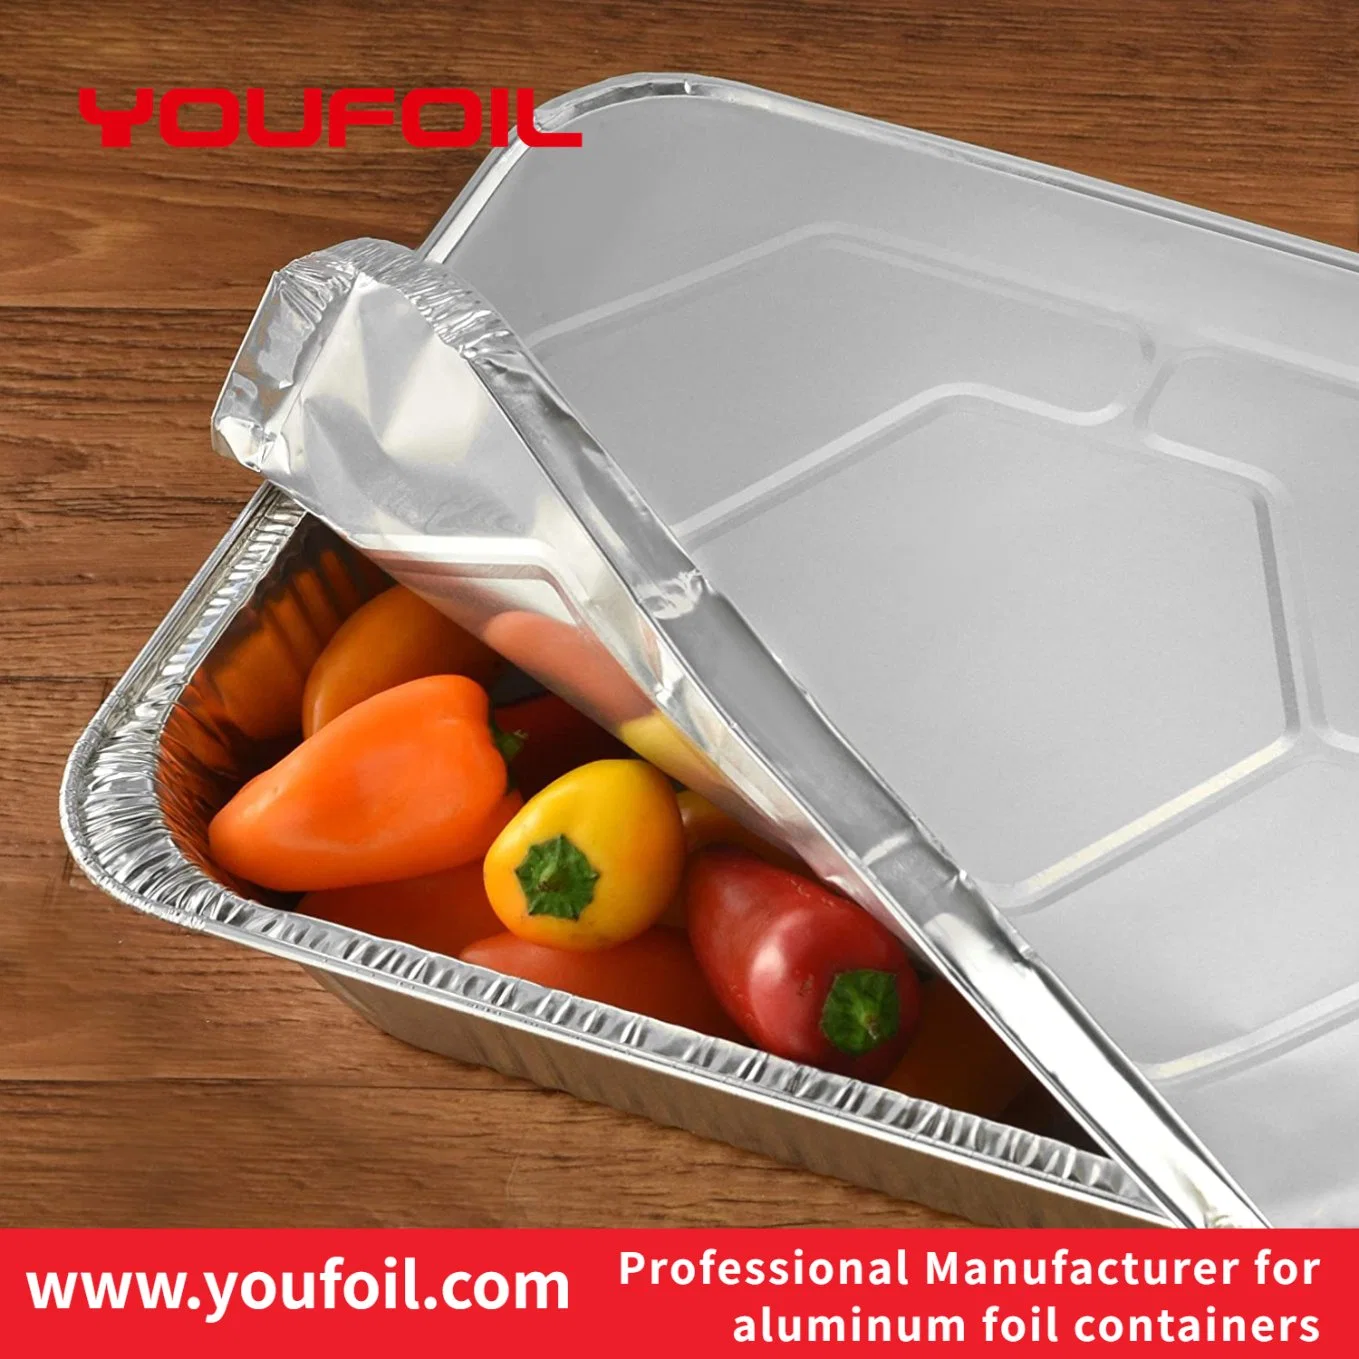 Half Size Aluminum Foil Container Lid Cover for Disposable Food Pan